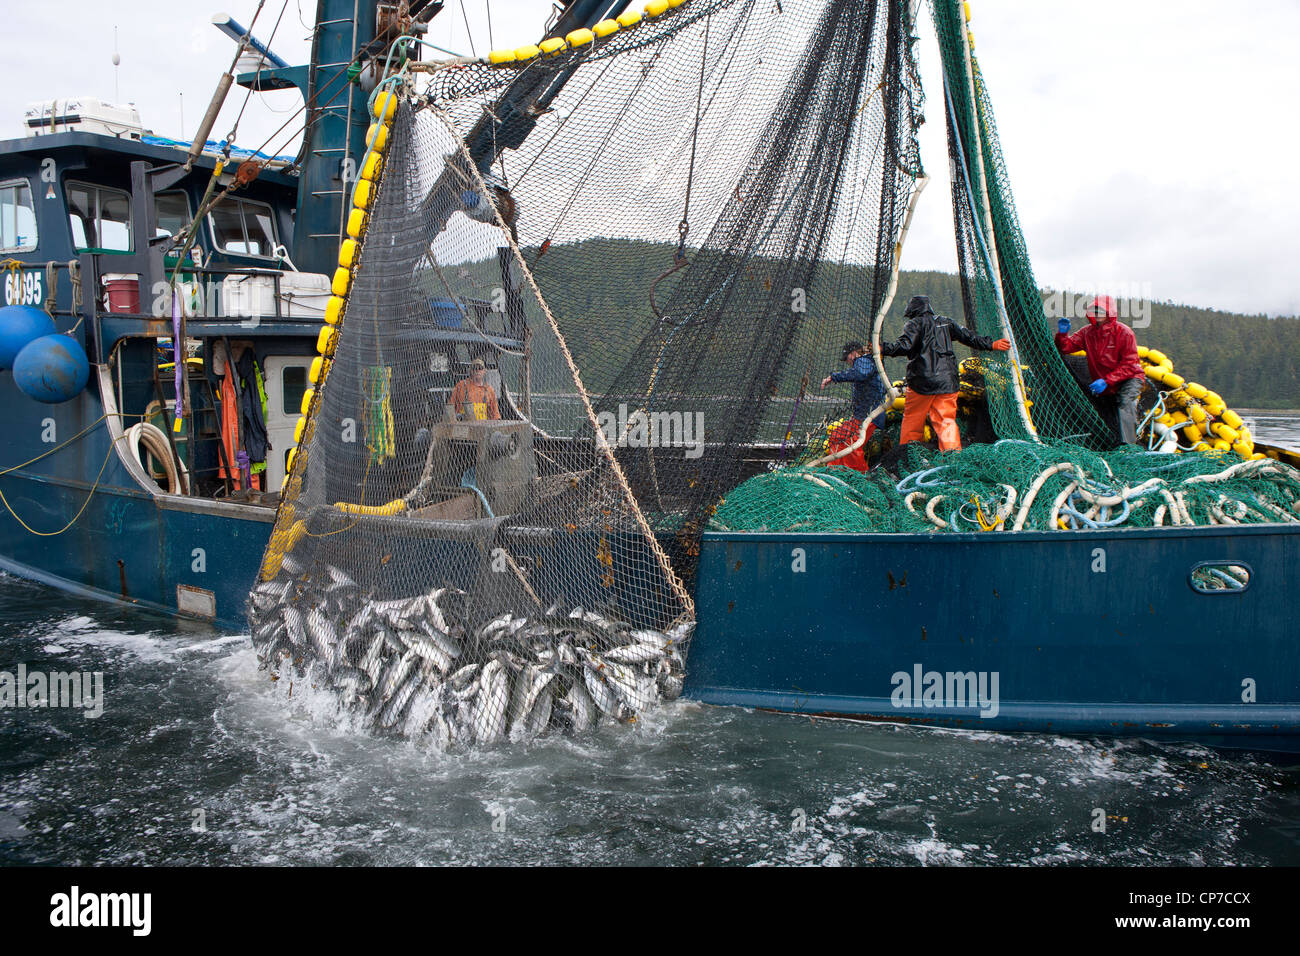 Commercial Fishing Methods: Seining | wild seafood